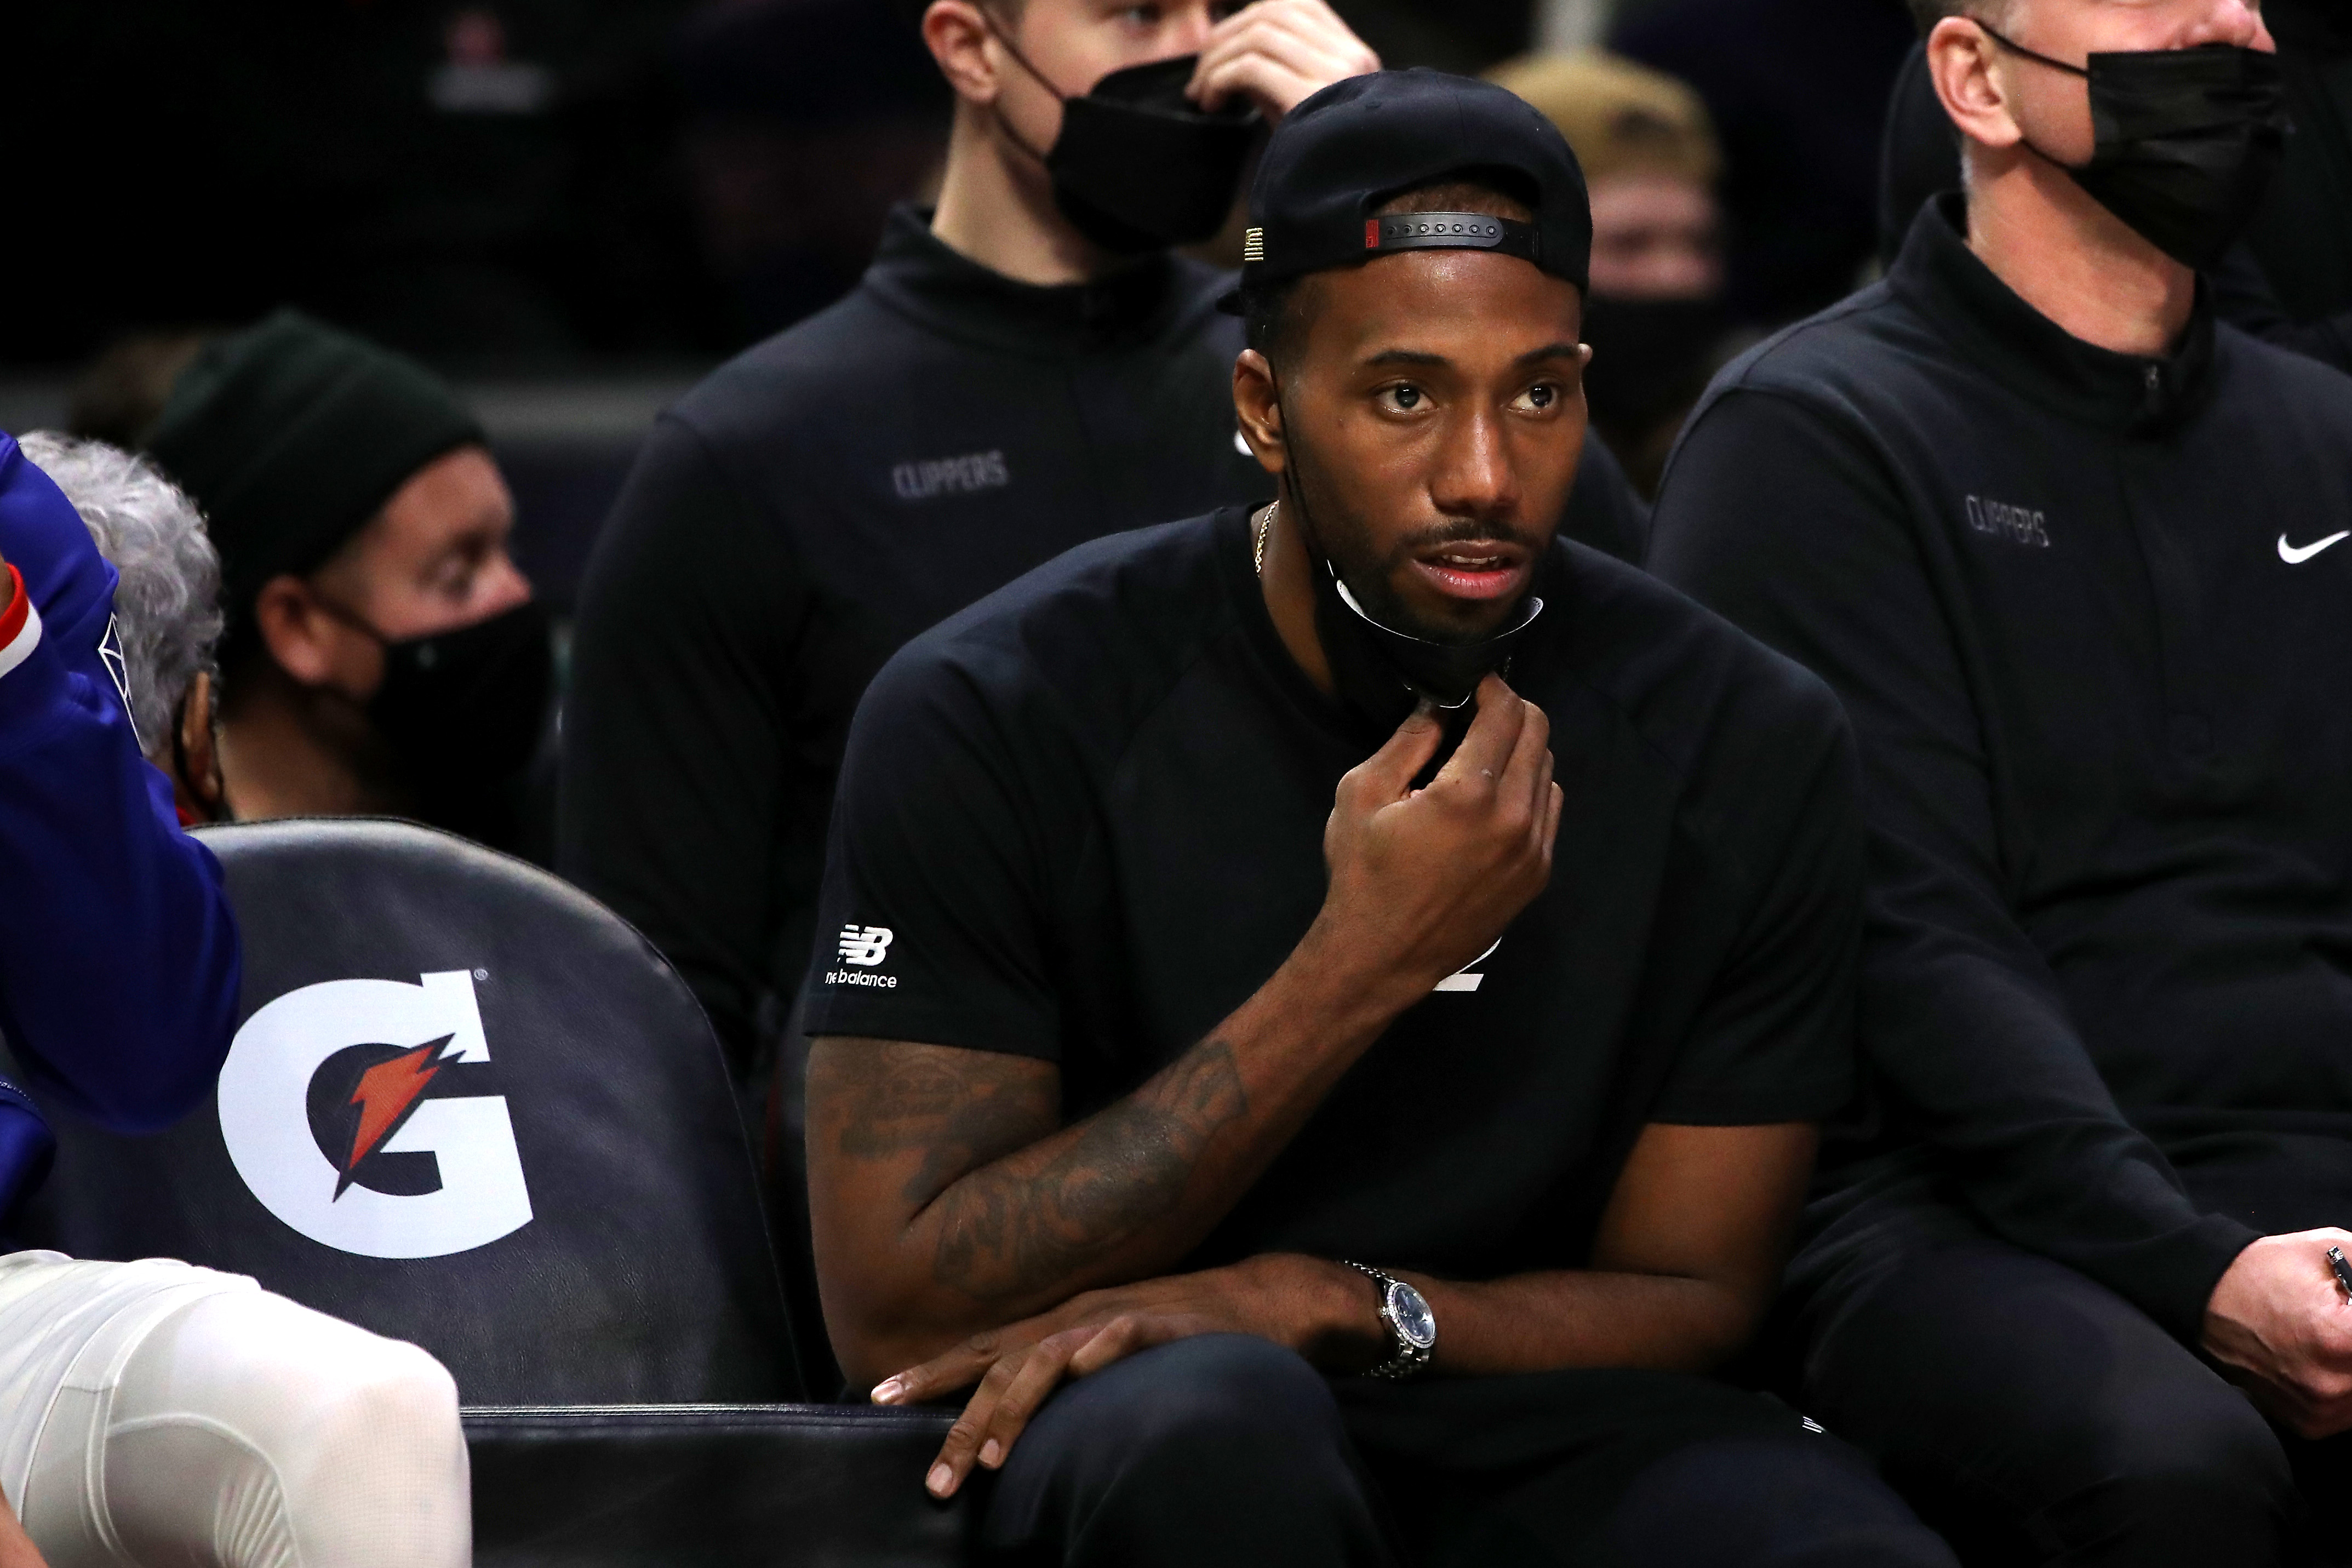 Los Angeles Clippers star Kawhi Leonard looks on from the bench during an NBA game against the Denver Nuggets in December 2021